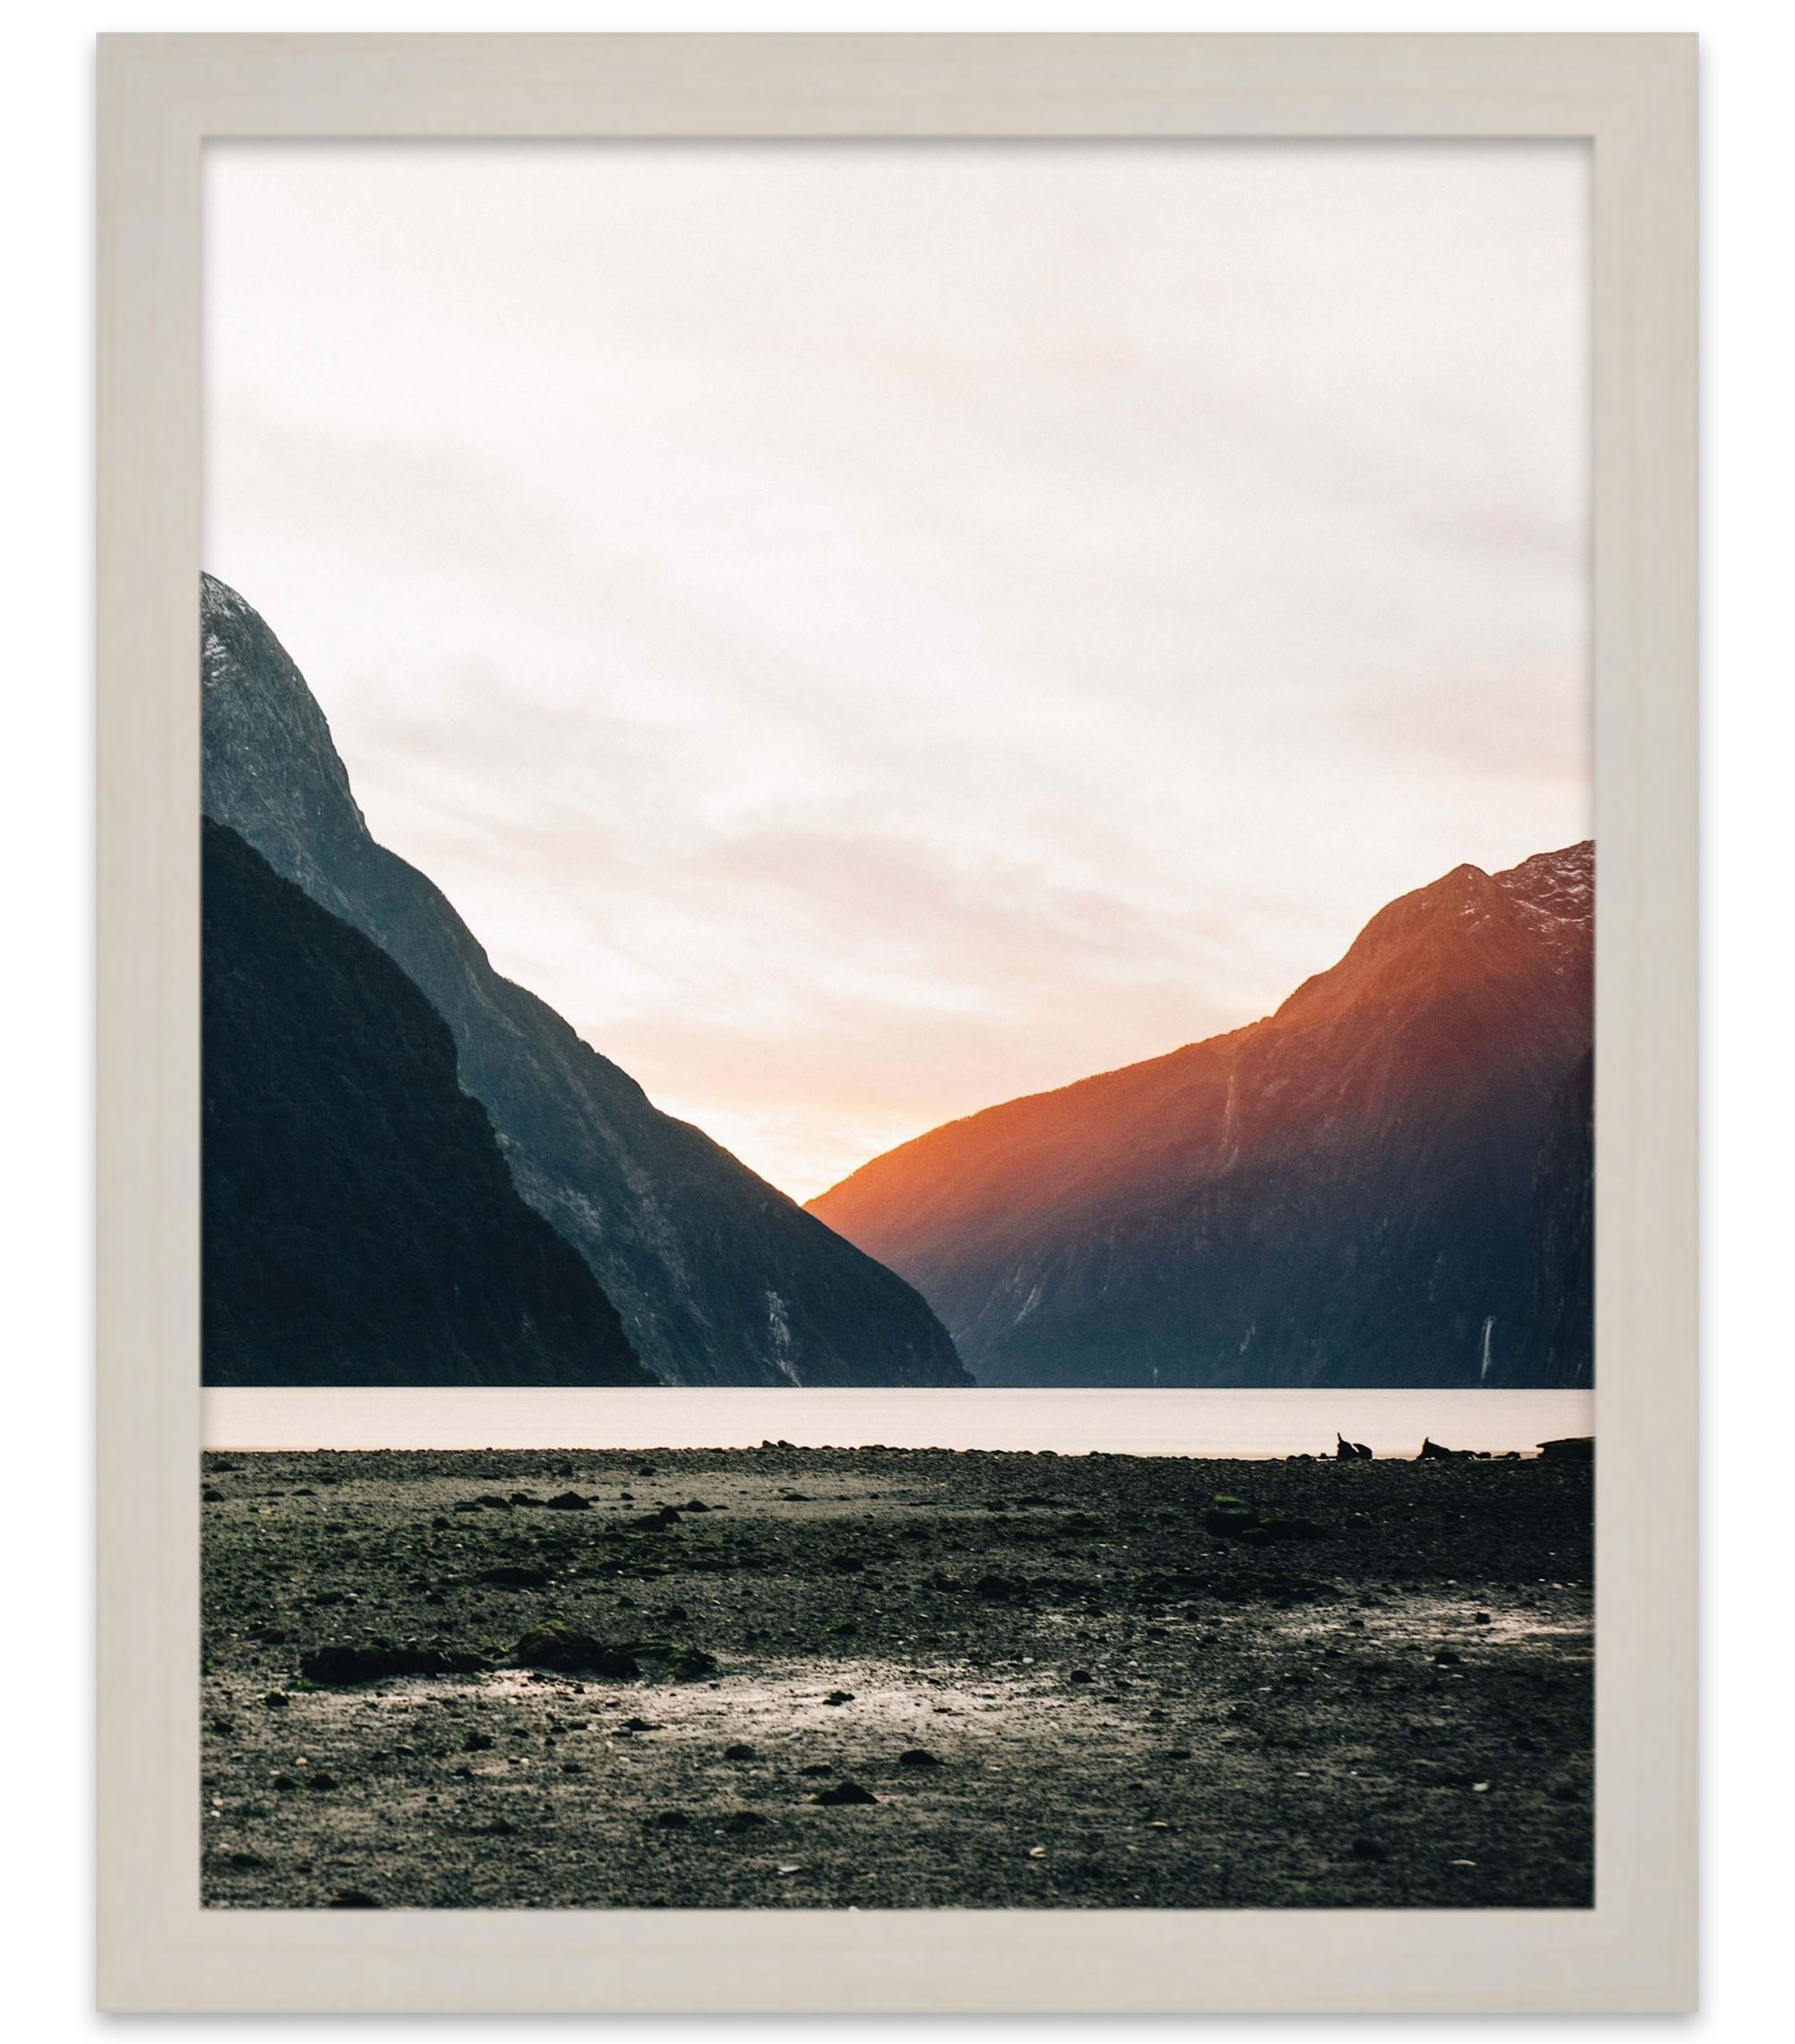 CustomPictureFrames.com 20x24 Flat White Wash Wood Frame - "The Edge" Thin - Great for Posters, Photos, Art Prints, Mirror, Chalk Boards, C